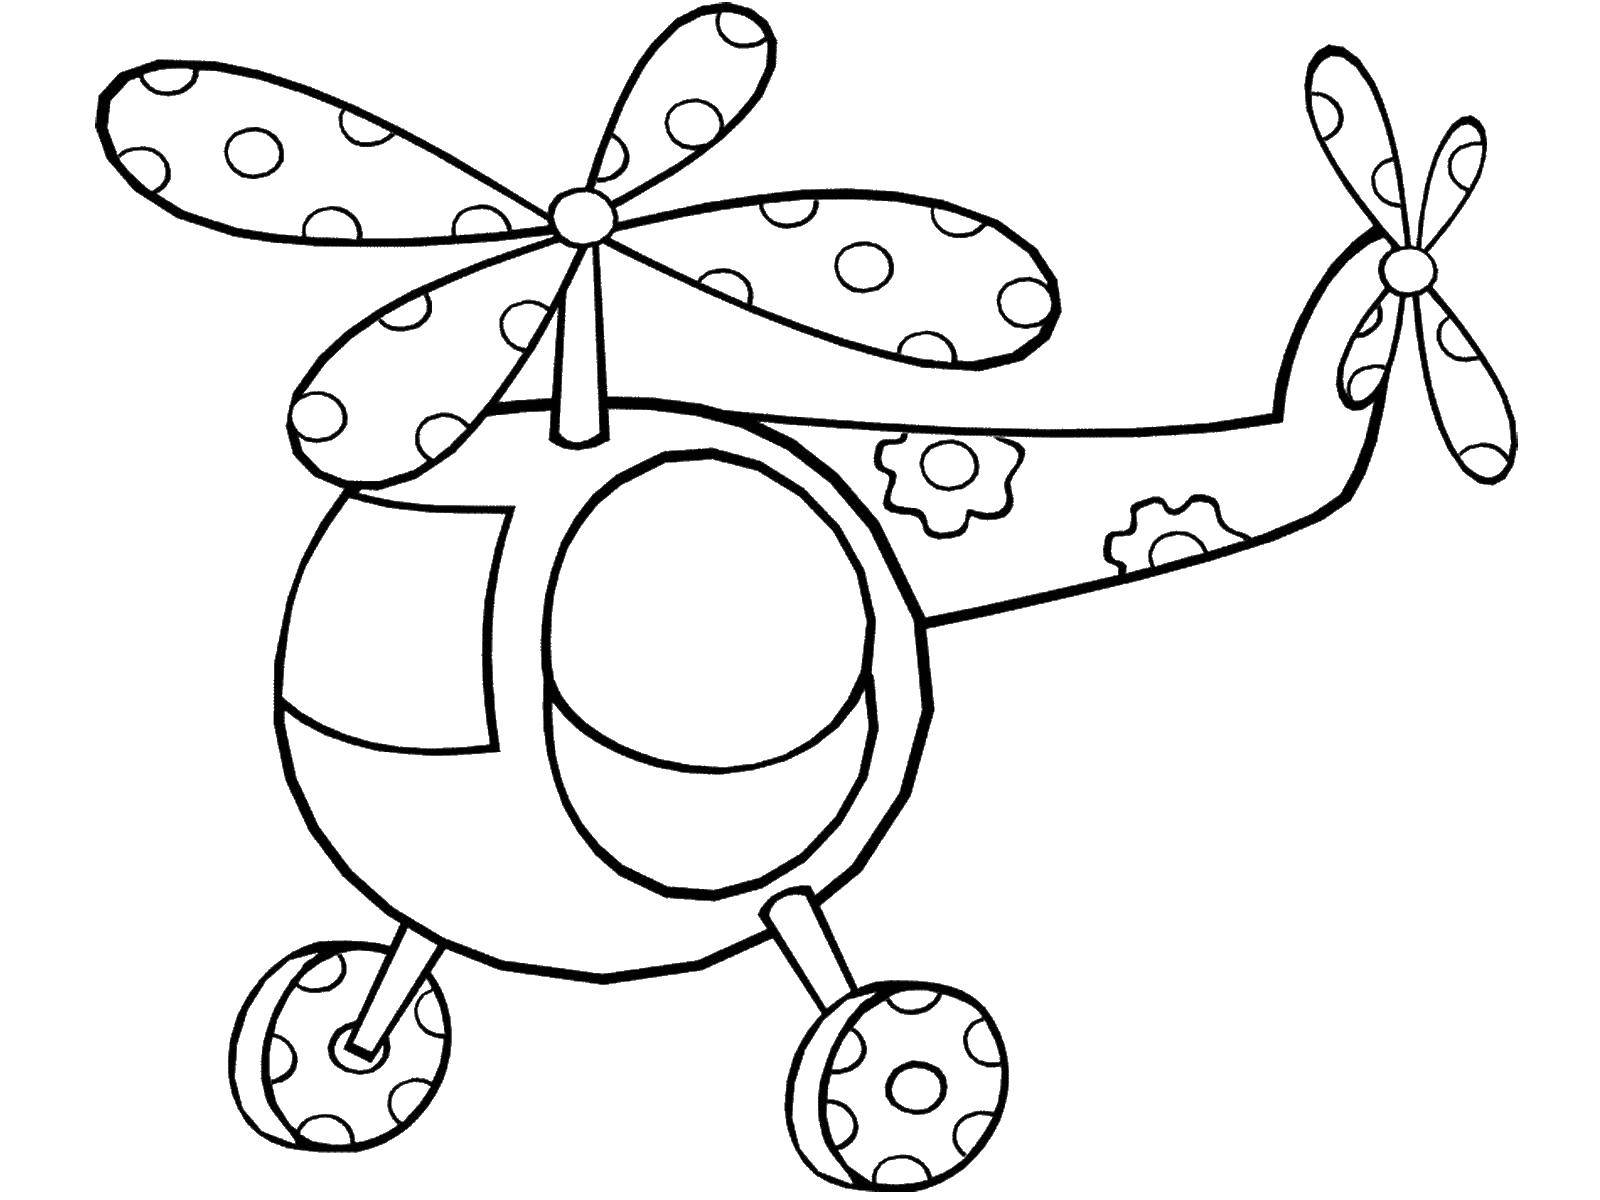 Coloring A helicopter with flowers. Category toys. Tags:  helicopter, propeller, flowers.